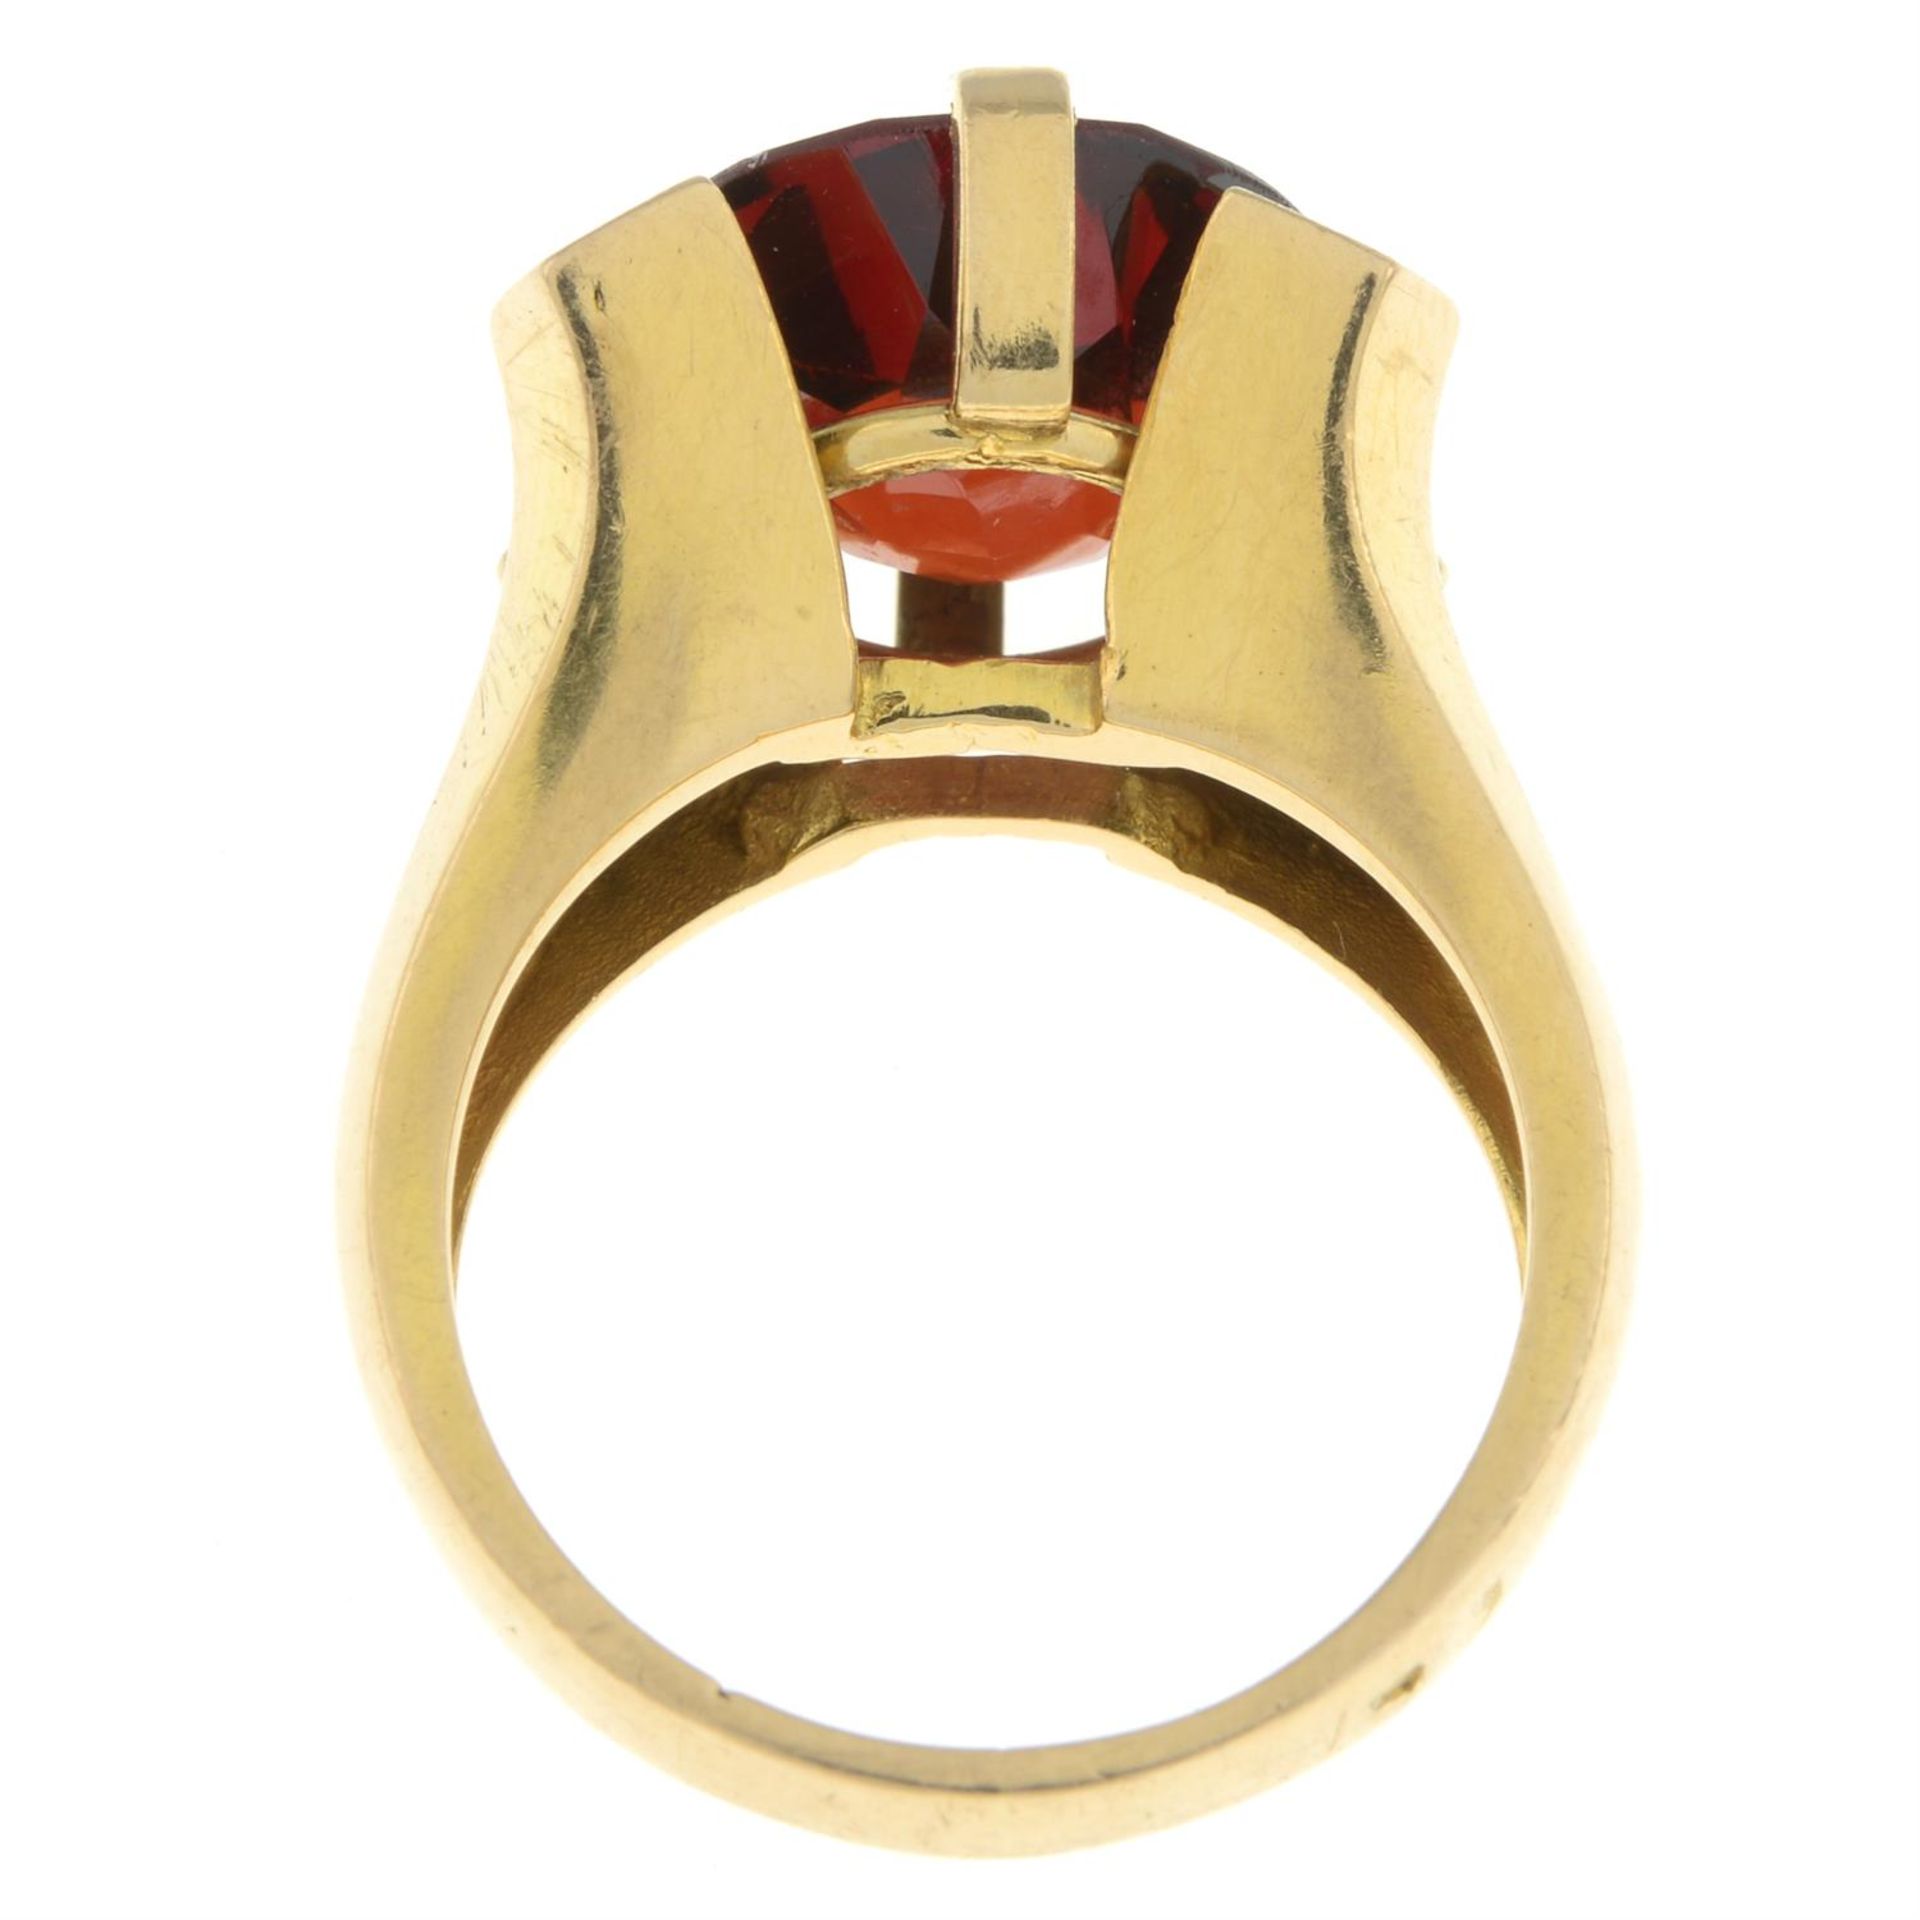 Mid 20th century 18ct gold citrine ring - Image 3 of 5